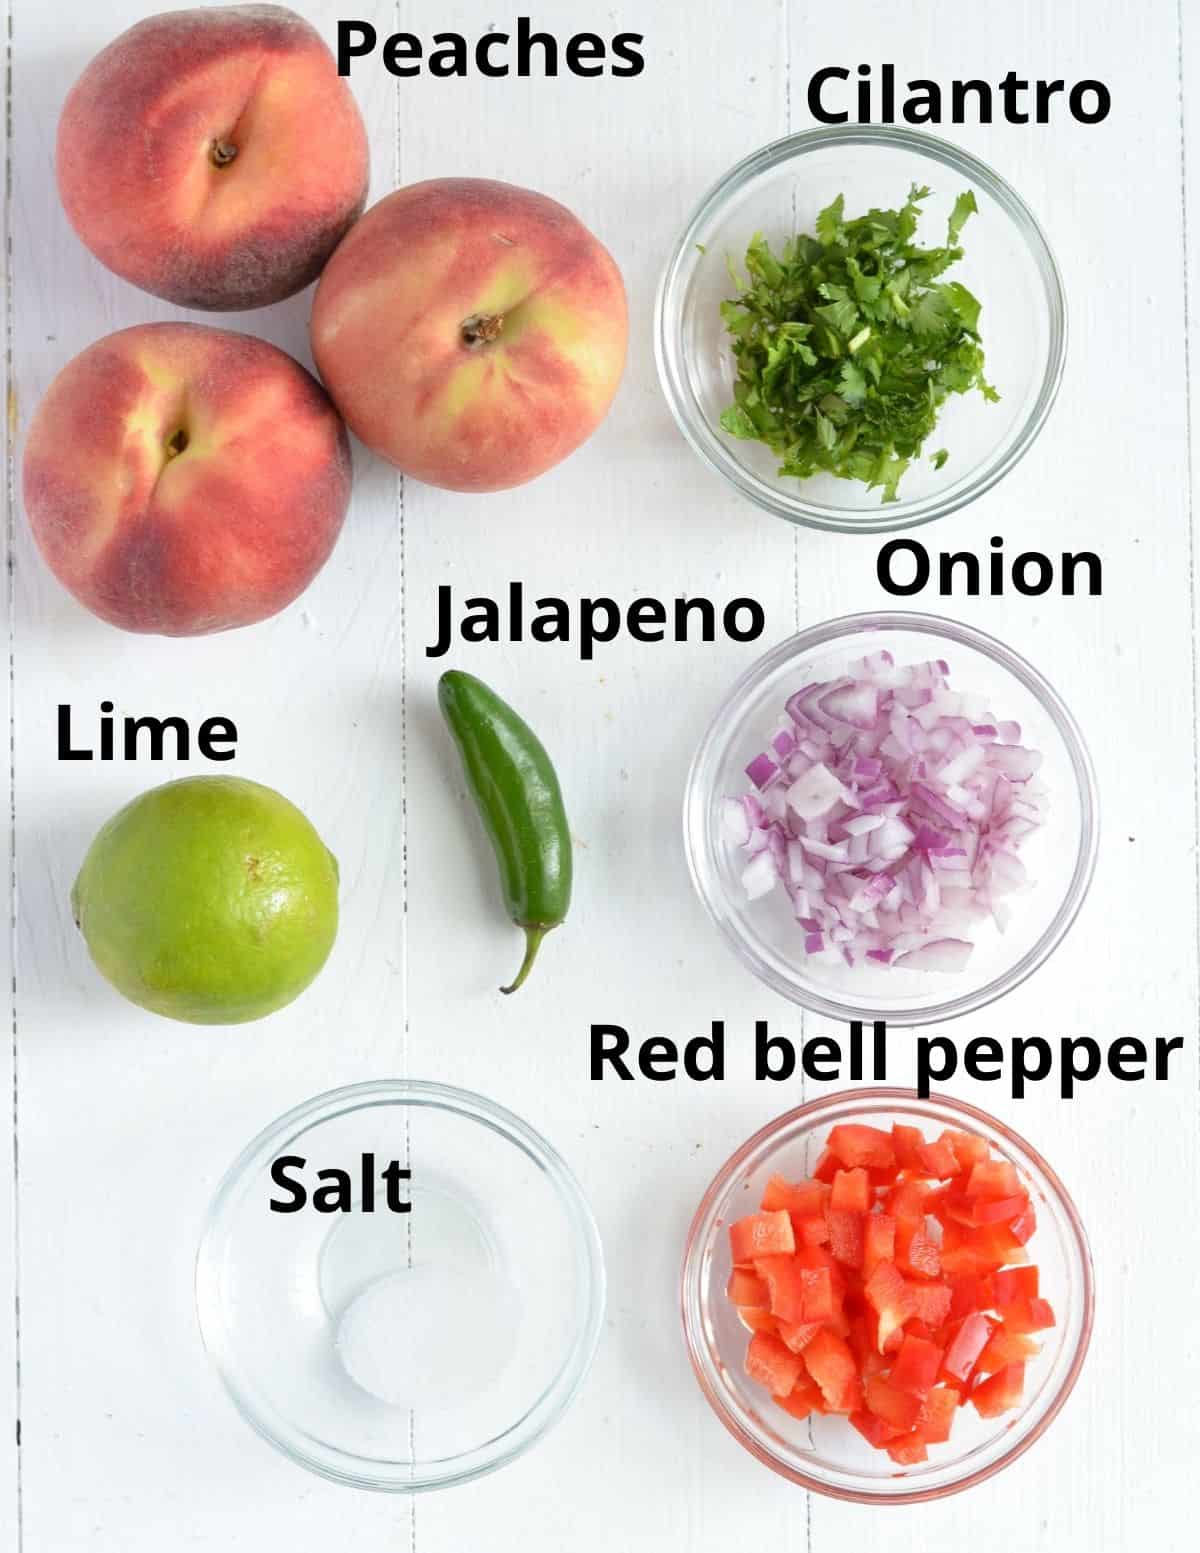 all the ingredients shown to make peach salsa